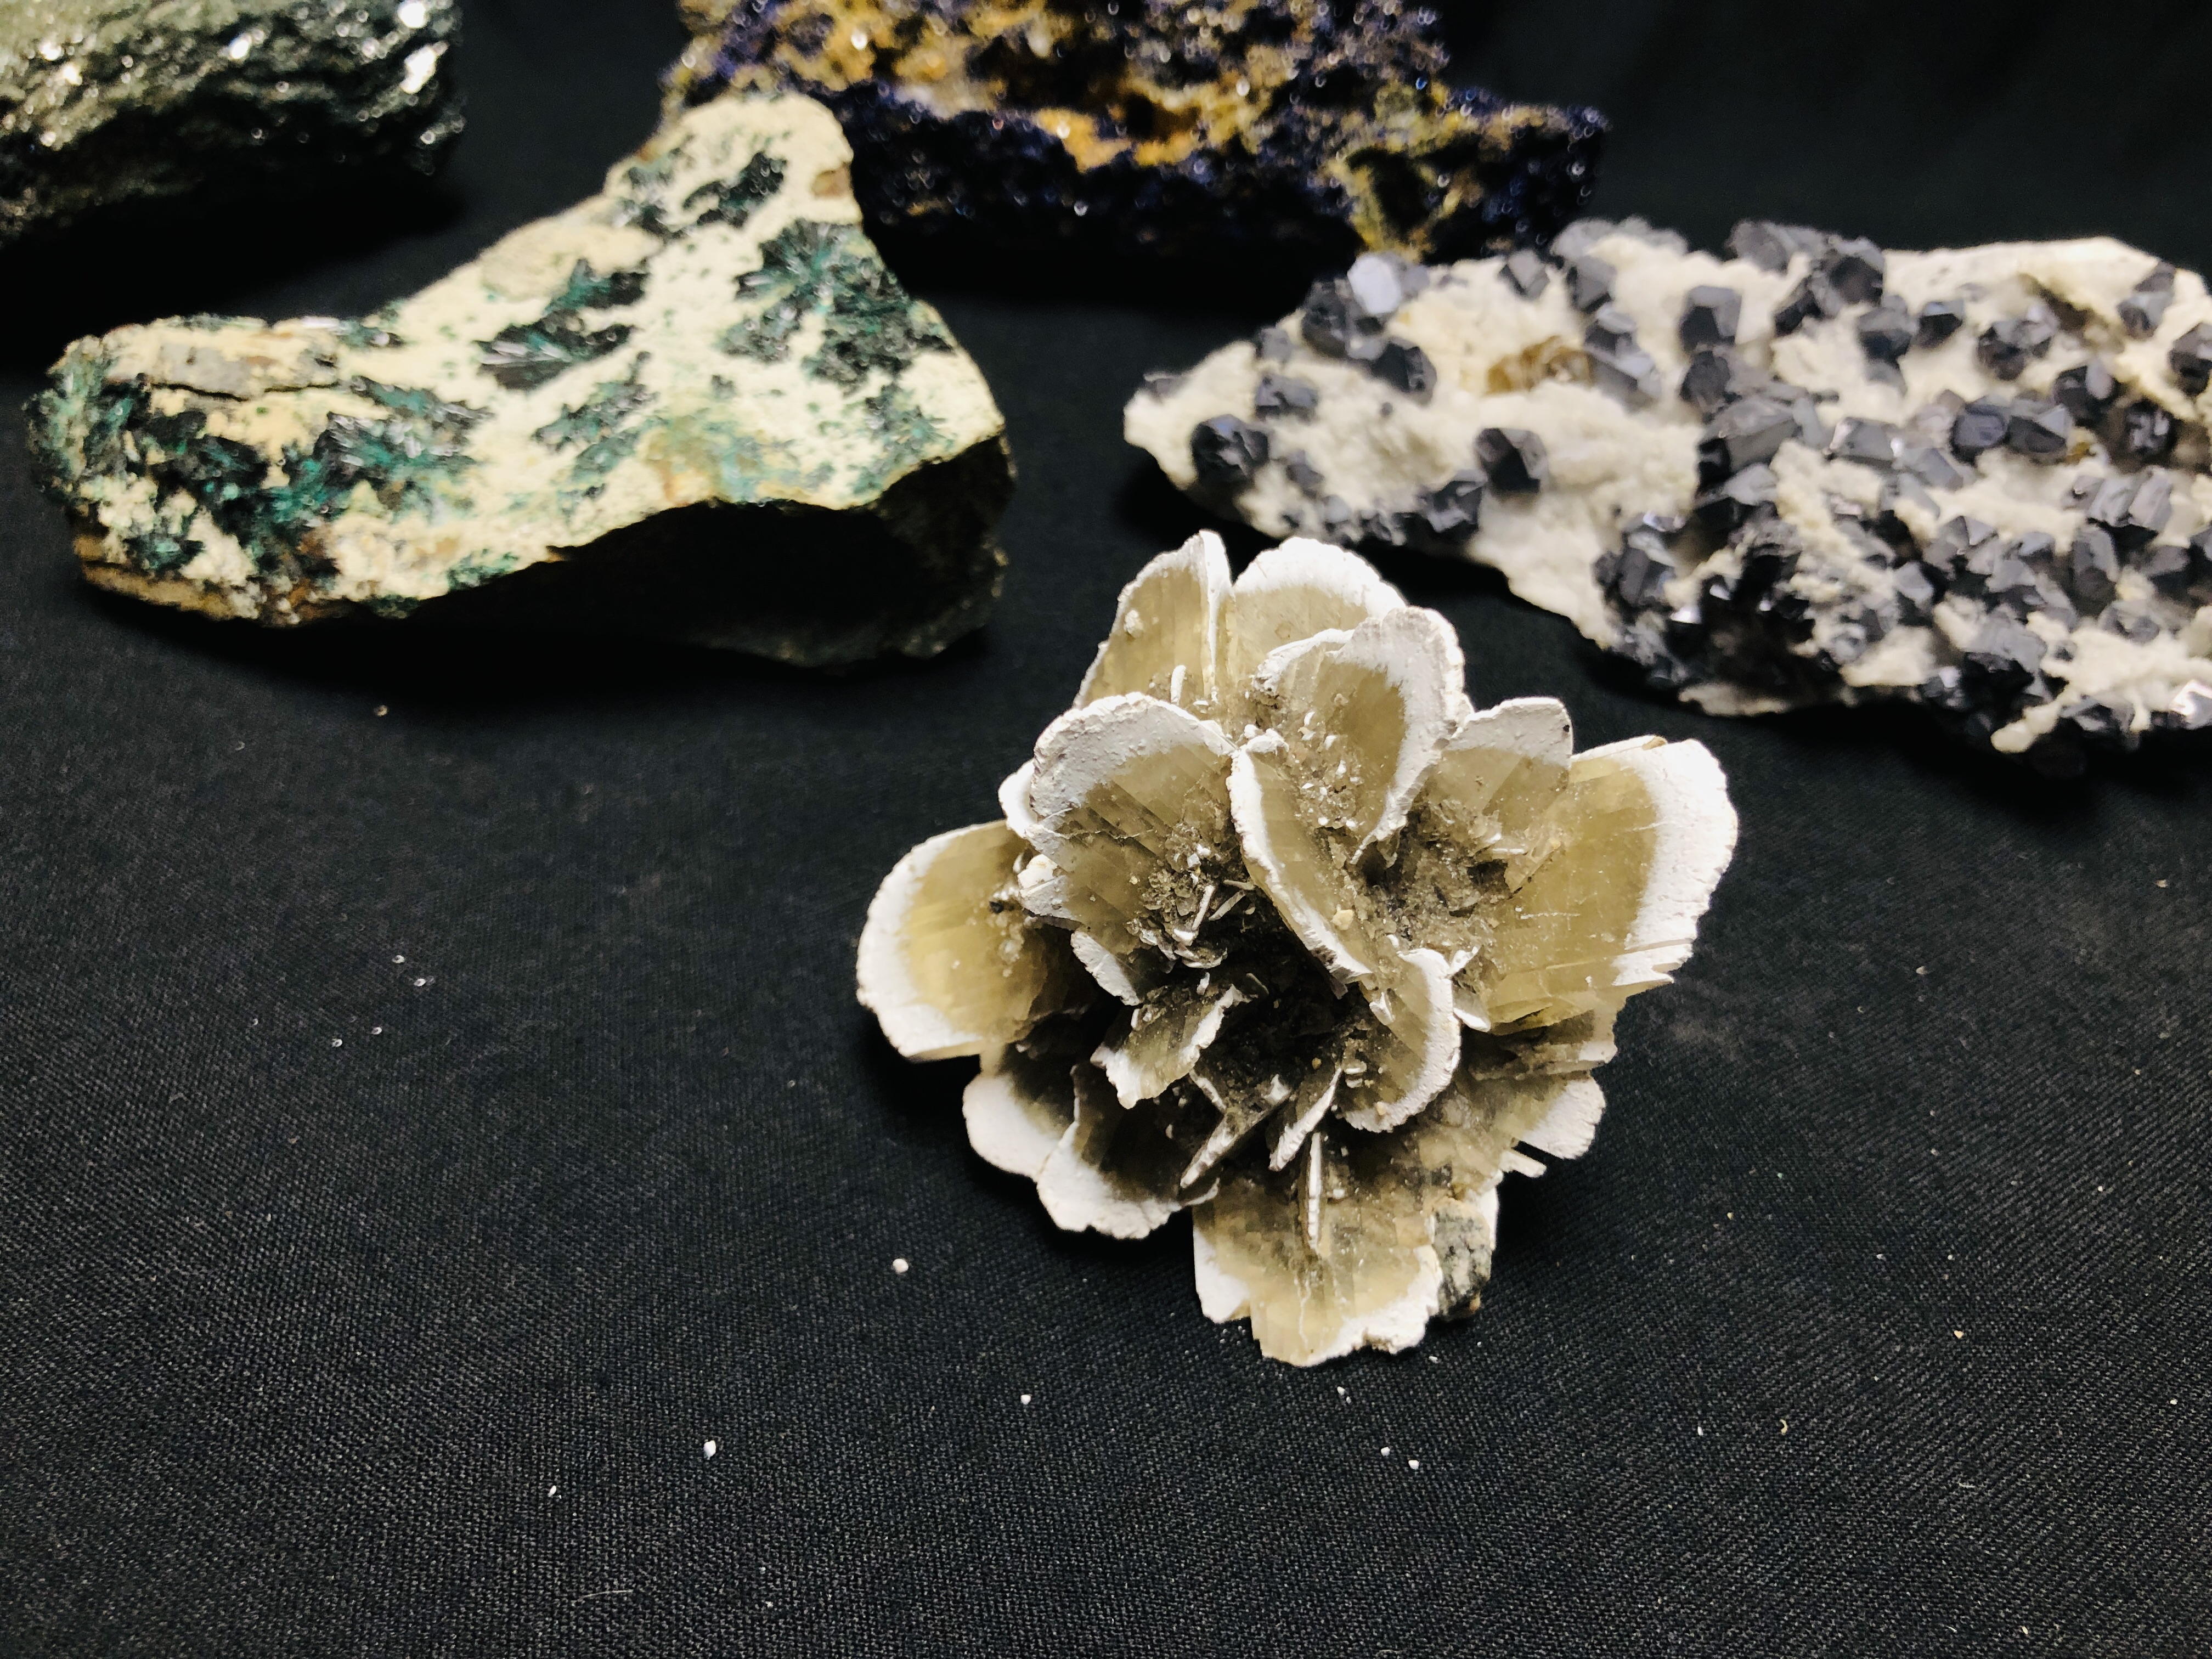 A COLLECTION OF APPROX 5 CRYSTAL AND MINERAL ROCK EXAMPLES. - Image 2 of 6